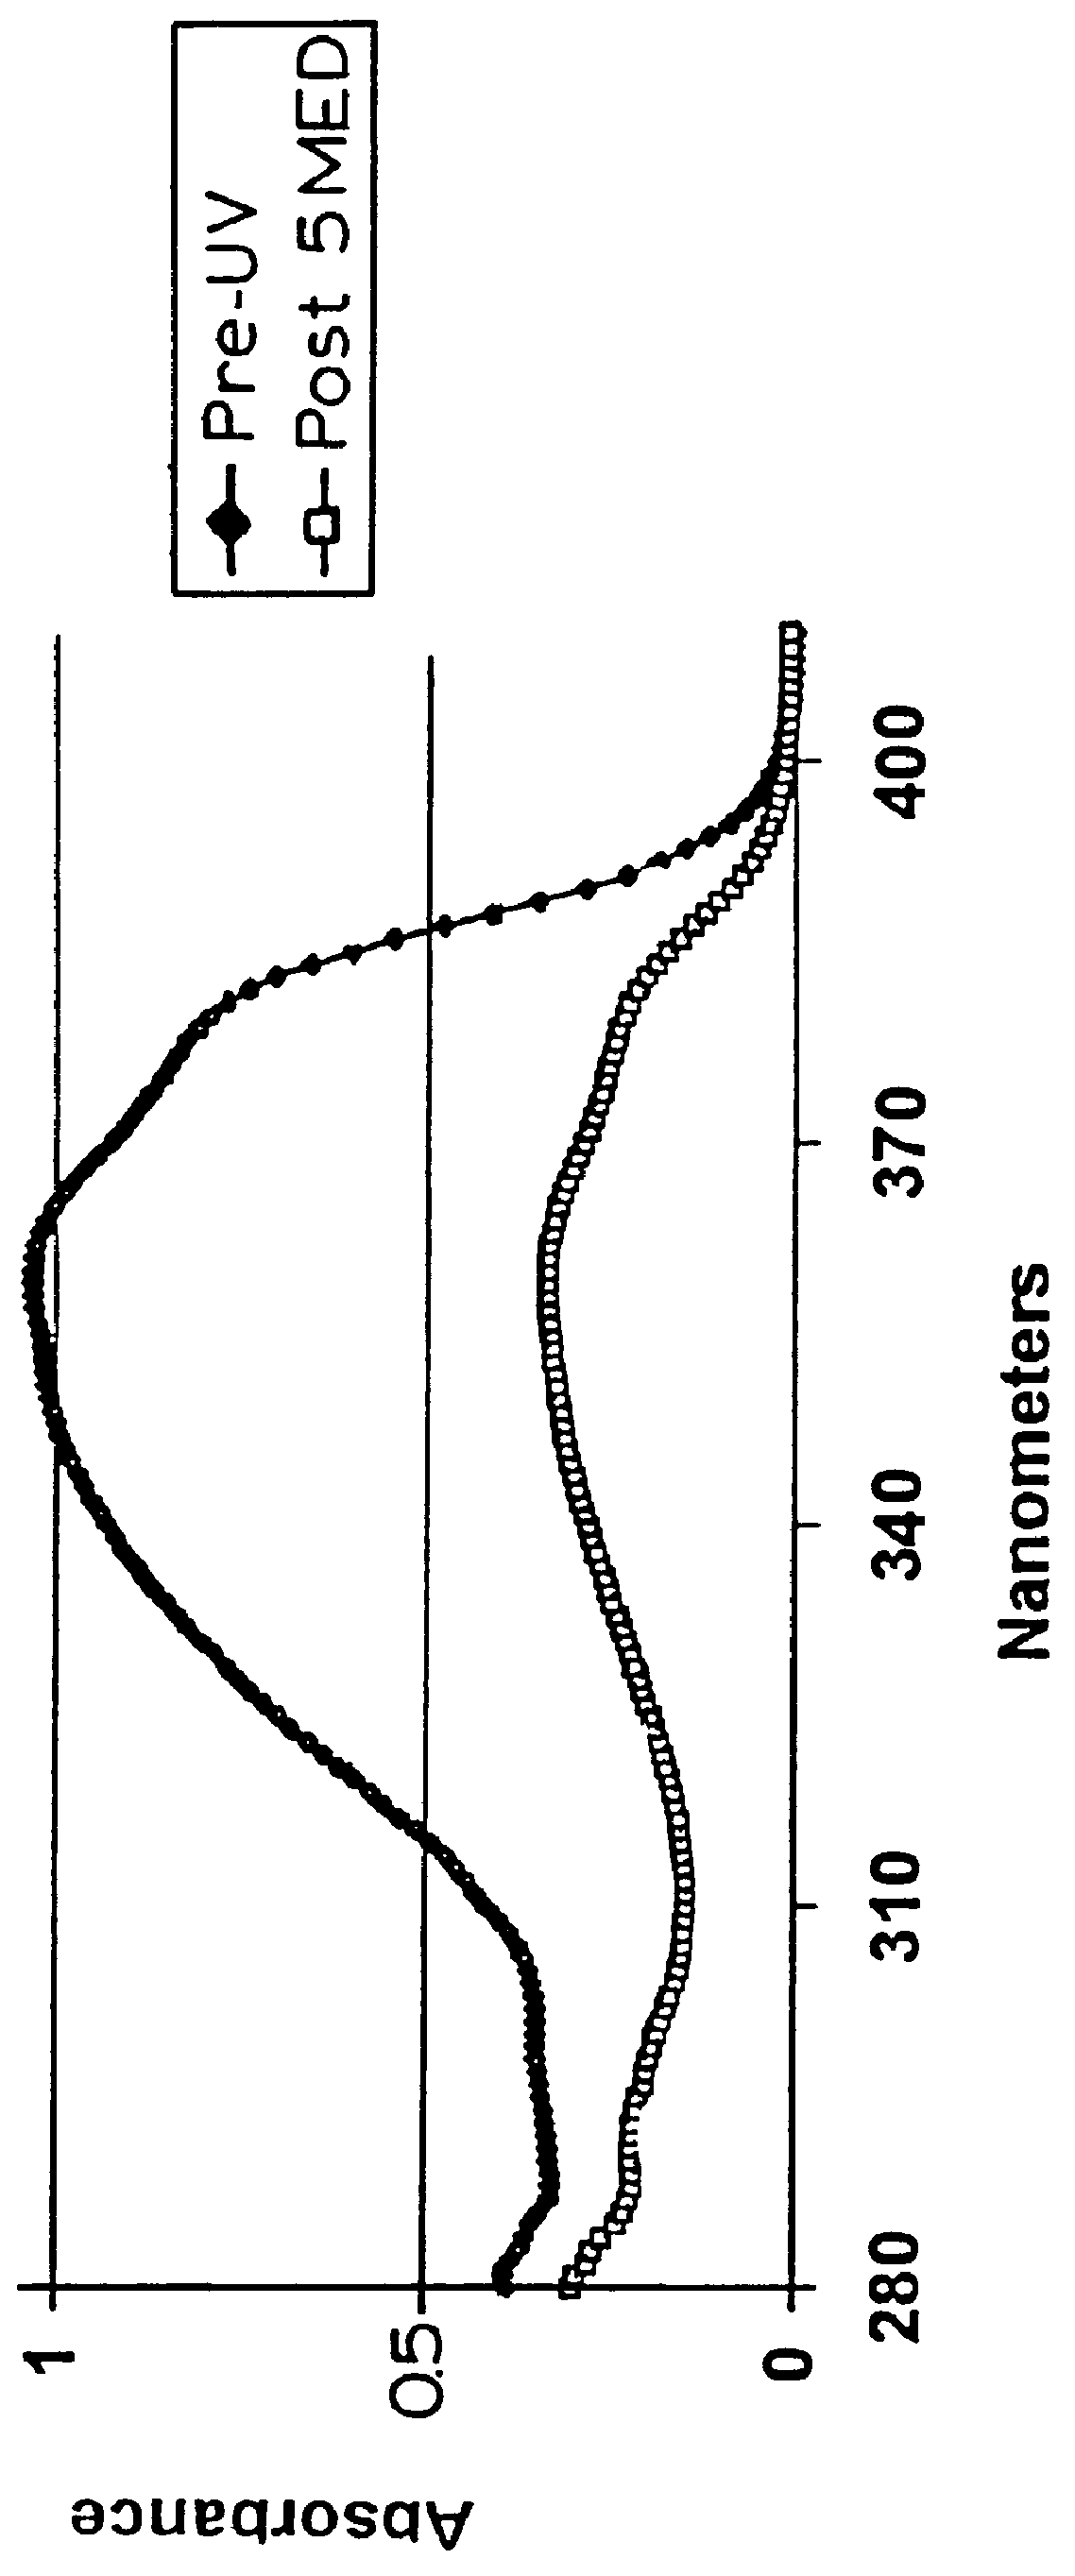 Compositions containing diesters or polyesters of naphthalene dicarboxylic acid and methods for imparting hair gloss and to provide hair color and hair dye stabilization